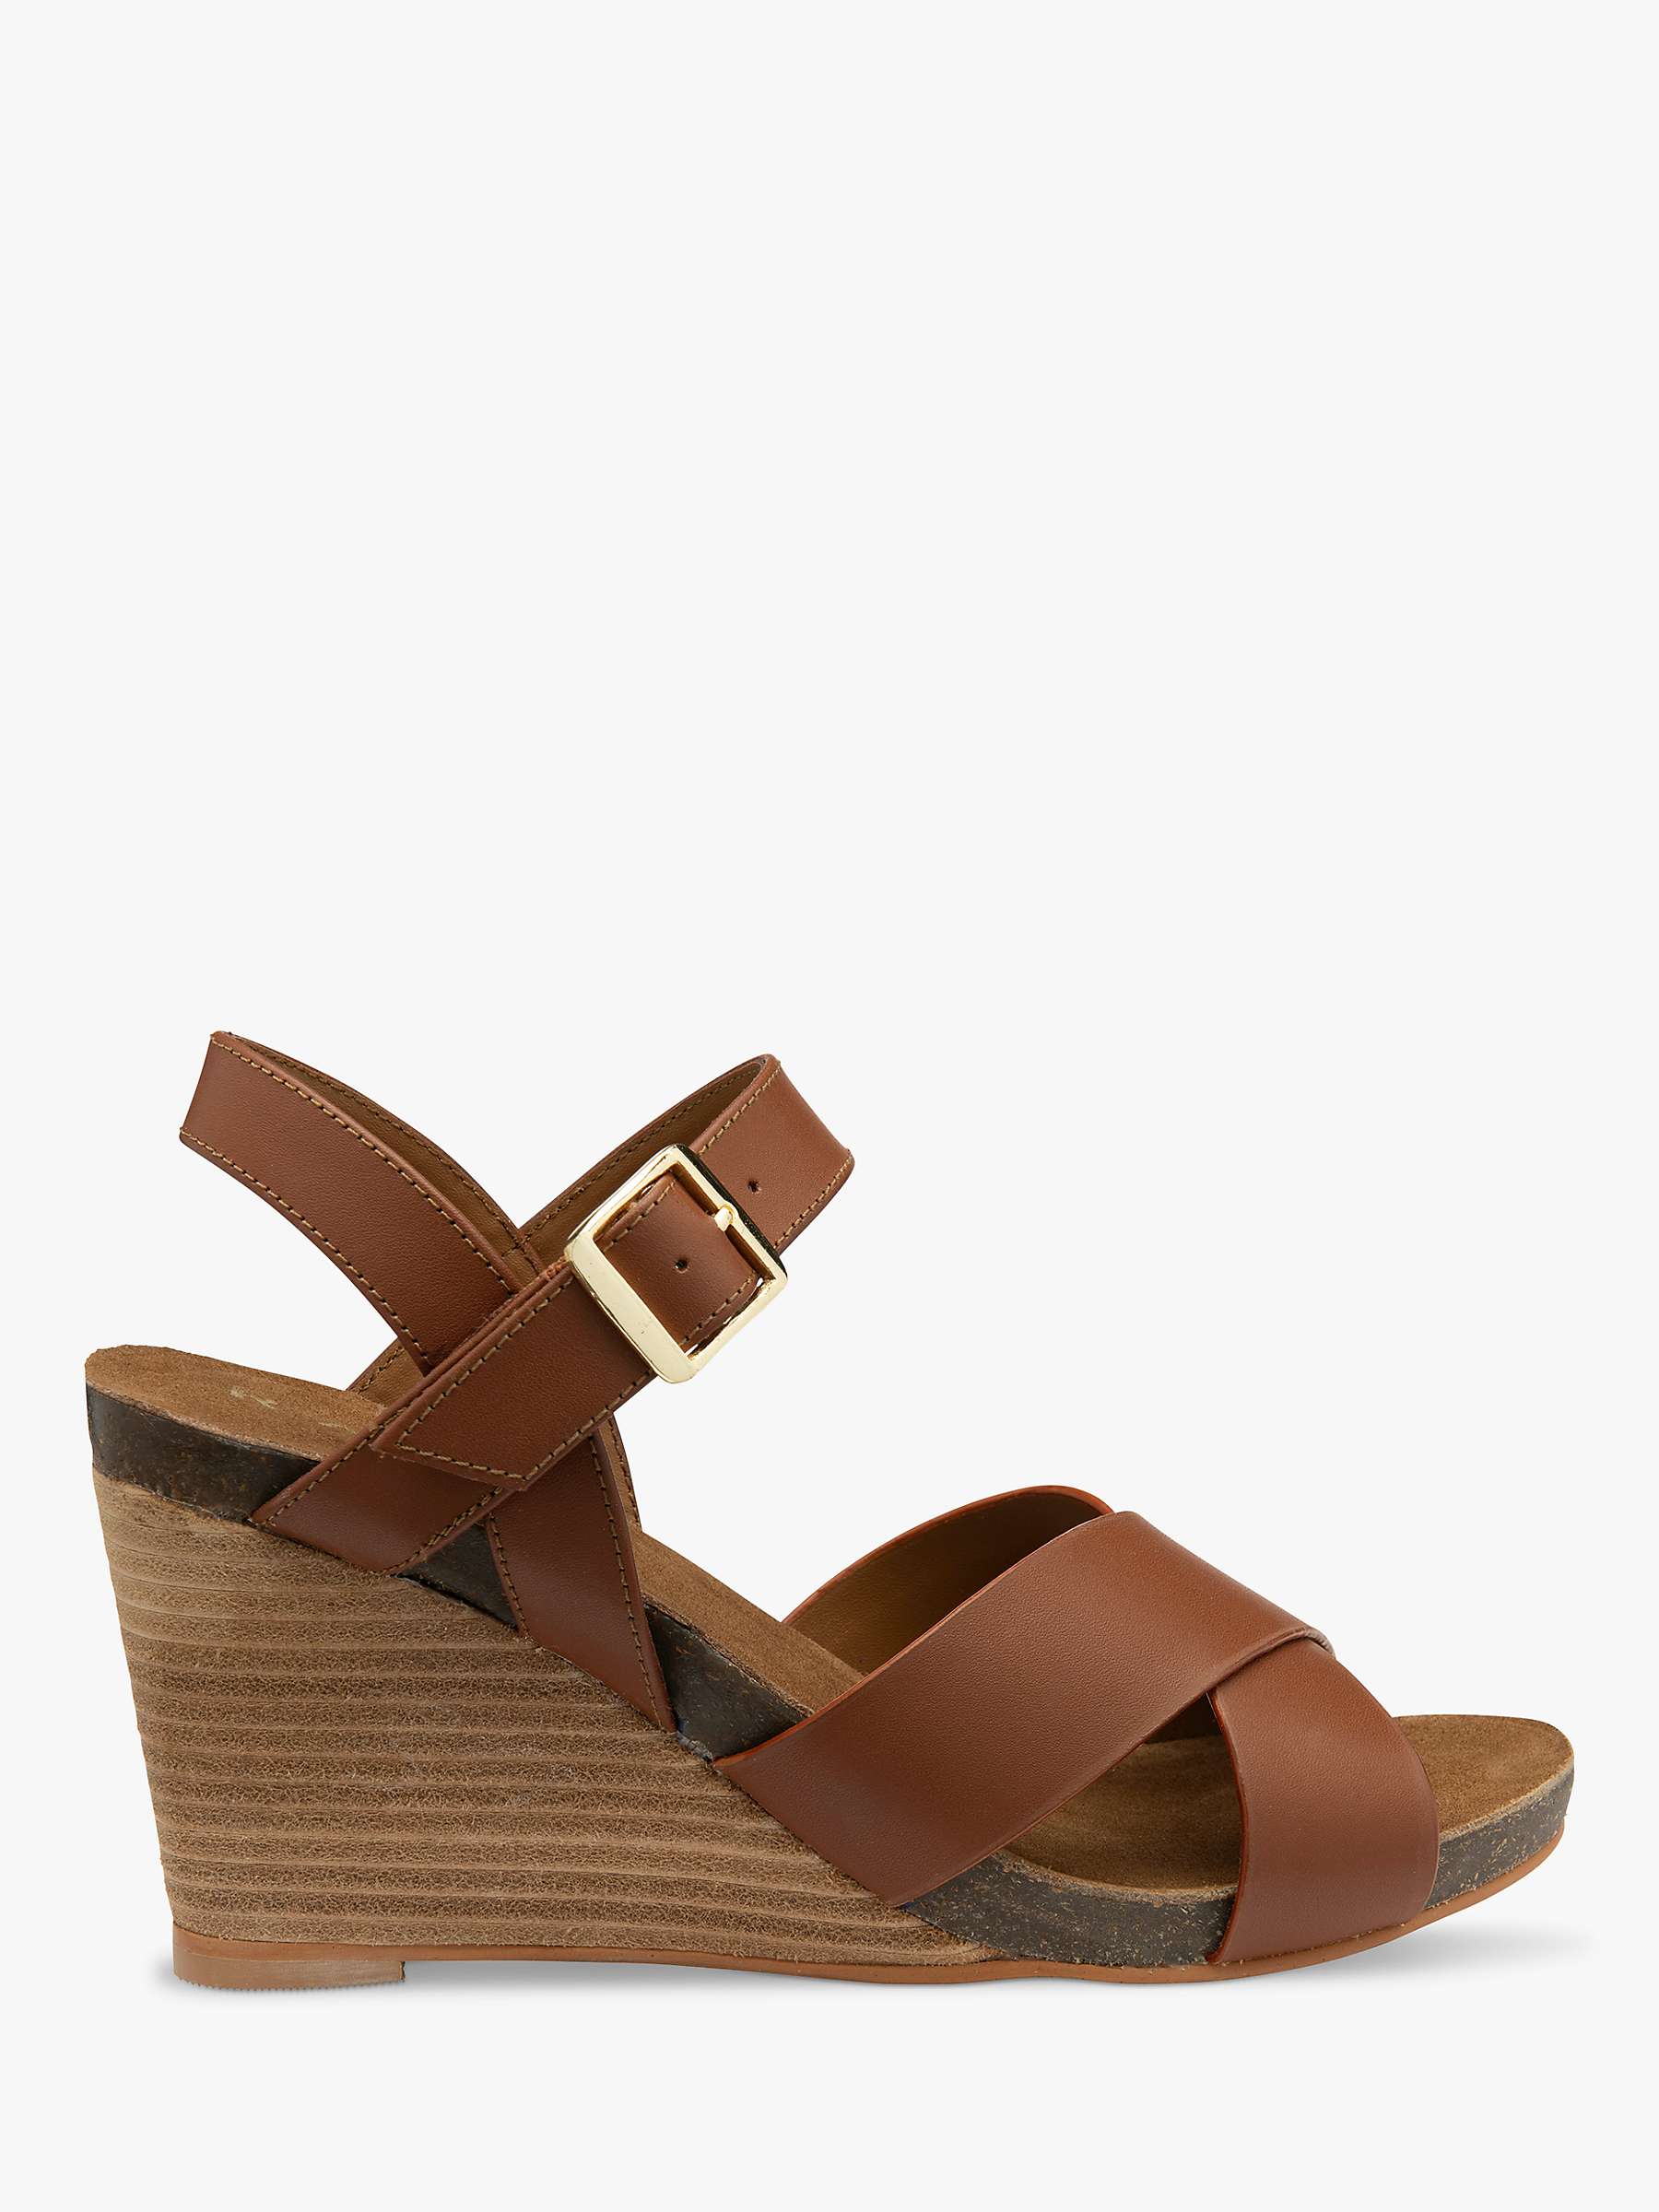 Buy Ravel Kelty Leather Wedge Sandals Online at johnlewis.com